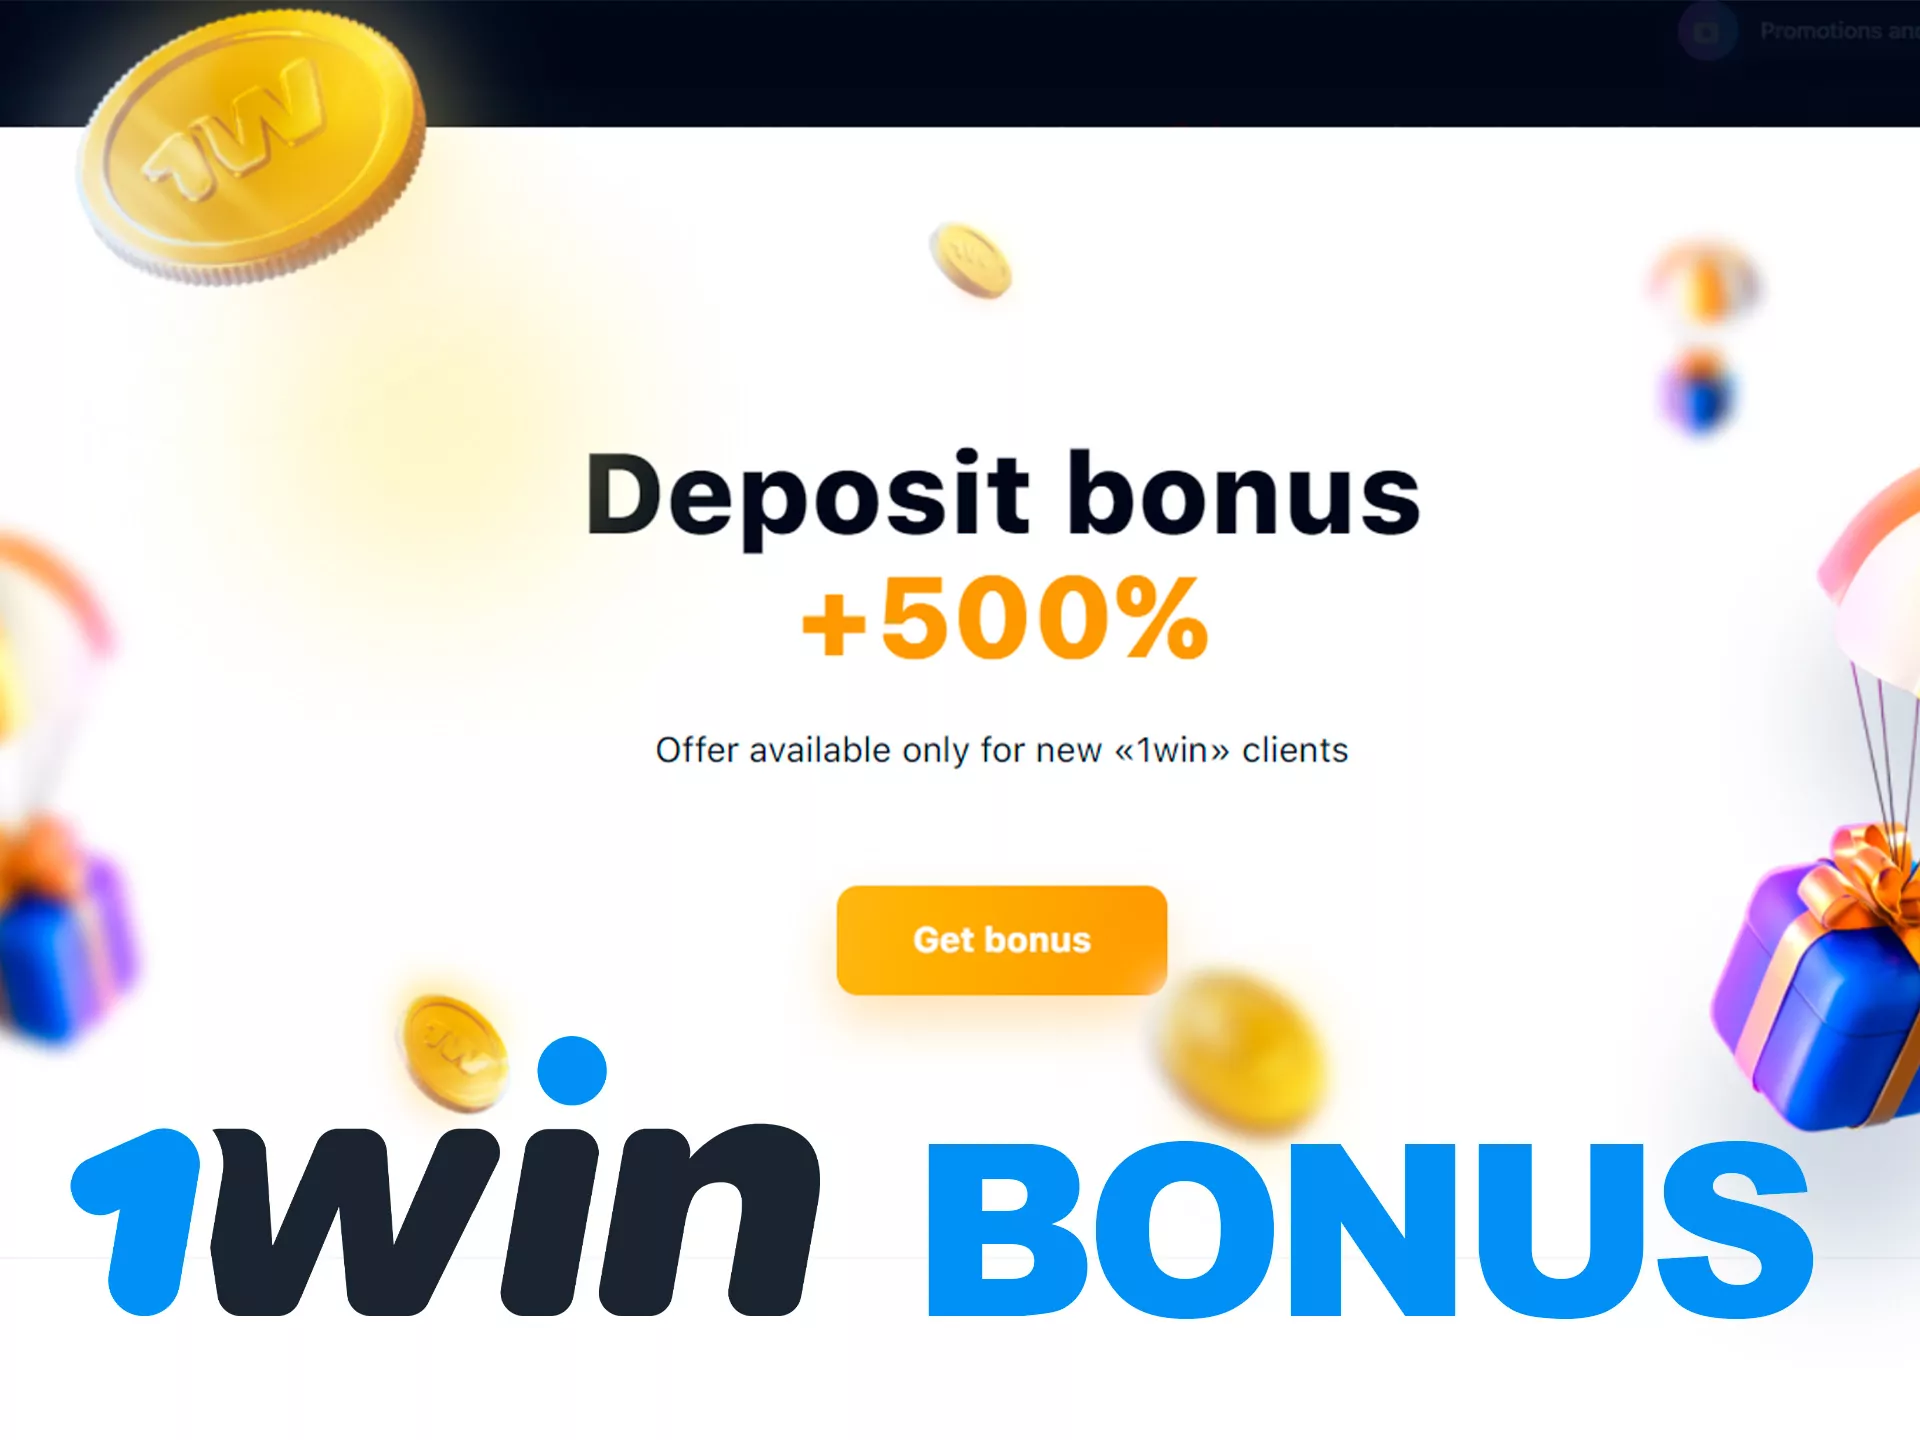 Only new players can get the 1win welcome bonus after the first deposit.